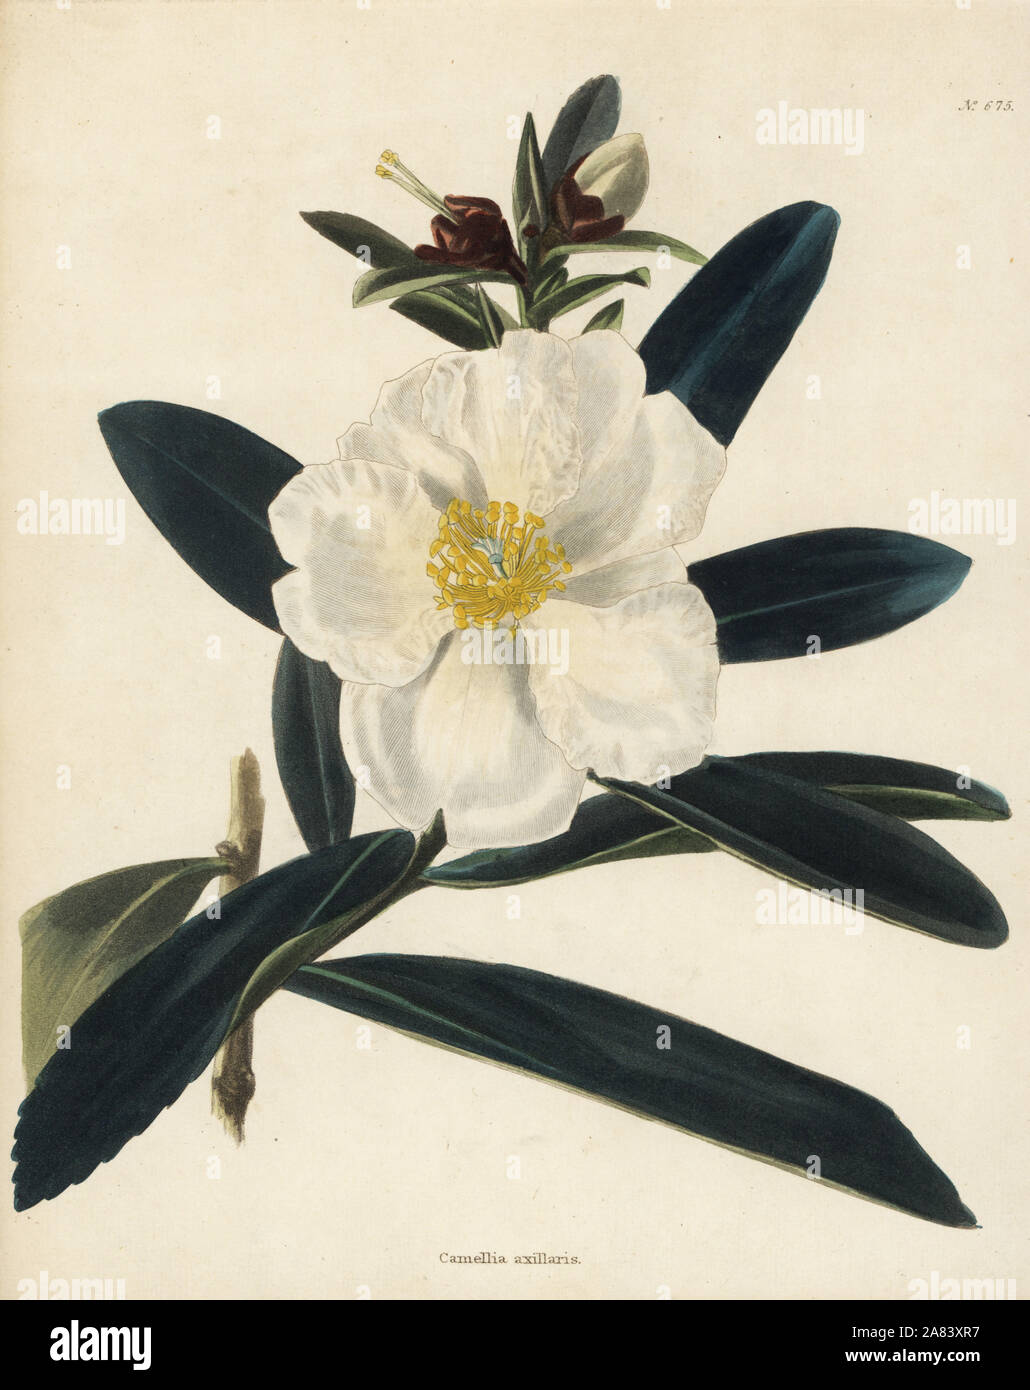 Fried egg plant, Gordonia axillaris (Camellia axillaris). Handcoloured copperplate engraving by George Cooke from Conrad Loddiges' Botanical Cabinet, Hackney, 1820. Stock Photo